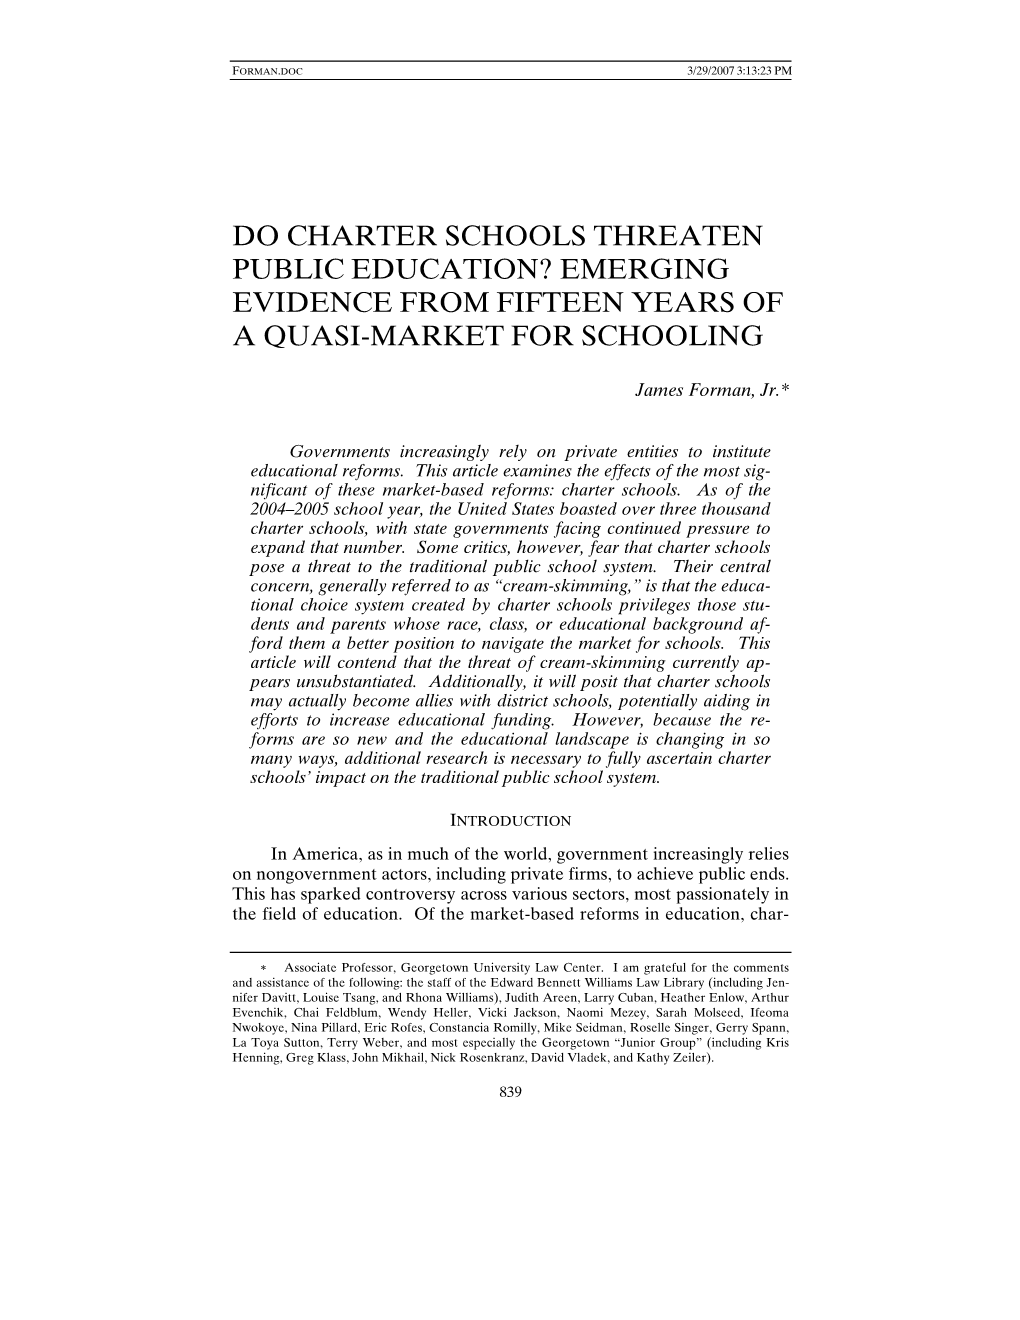 Do Charter Schools Threaten Public Education? Emerging Evidence from Fifteen Years of a Quasi-Market for Schooling